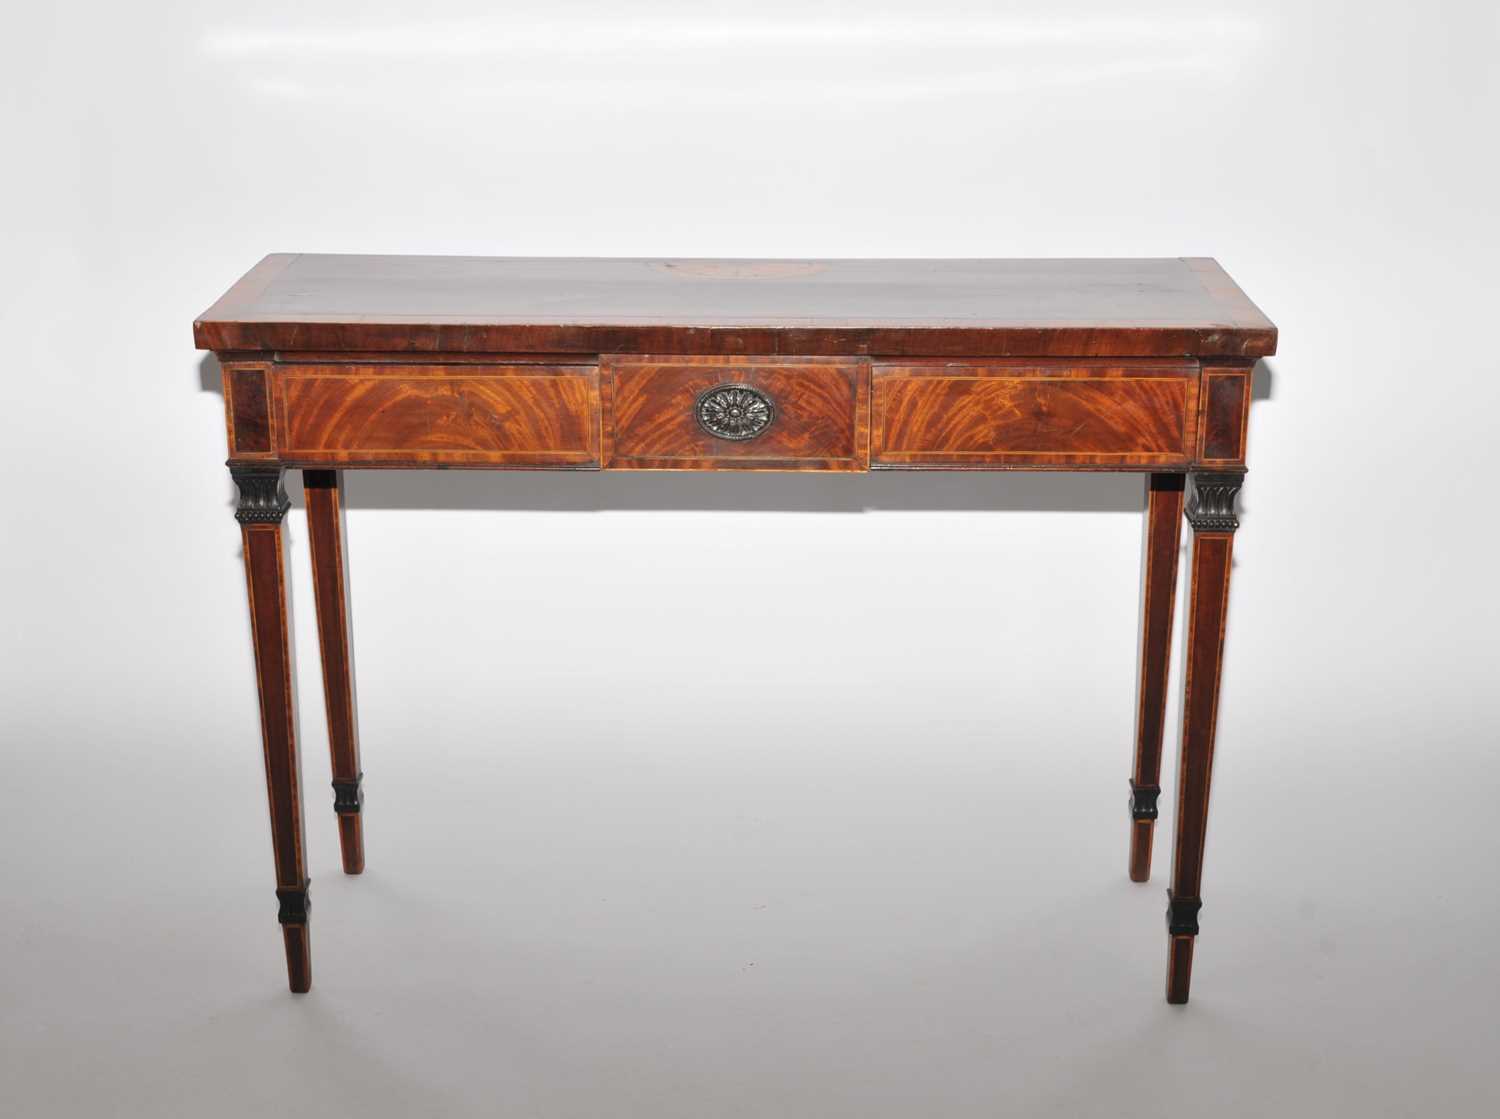 A George III mahogany and satinwood crossbanded serving table, the rectangular top inlaid with a